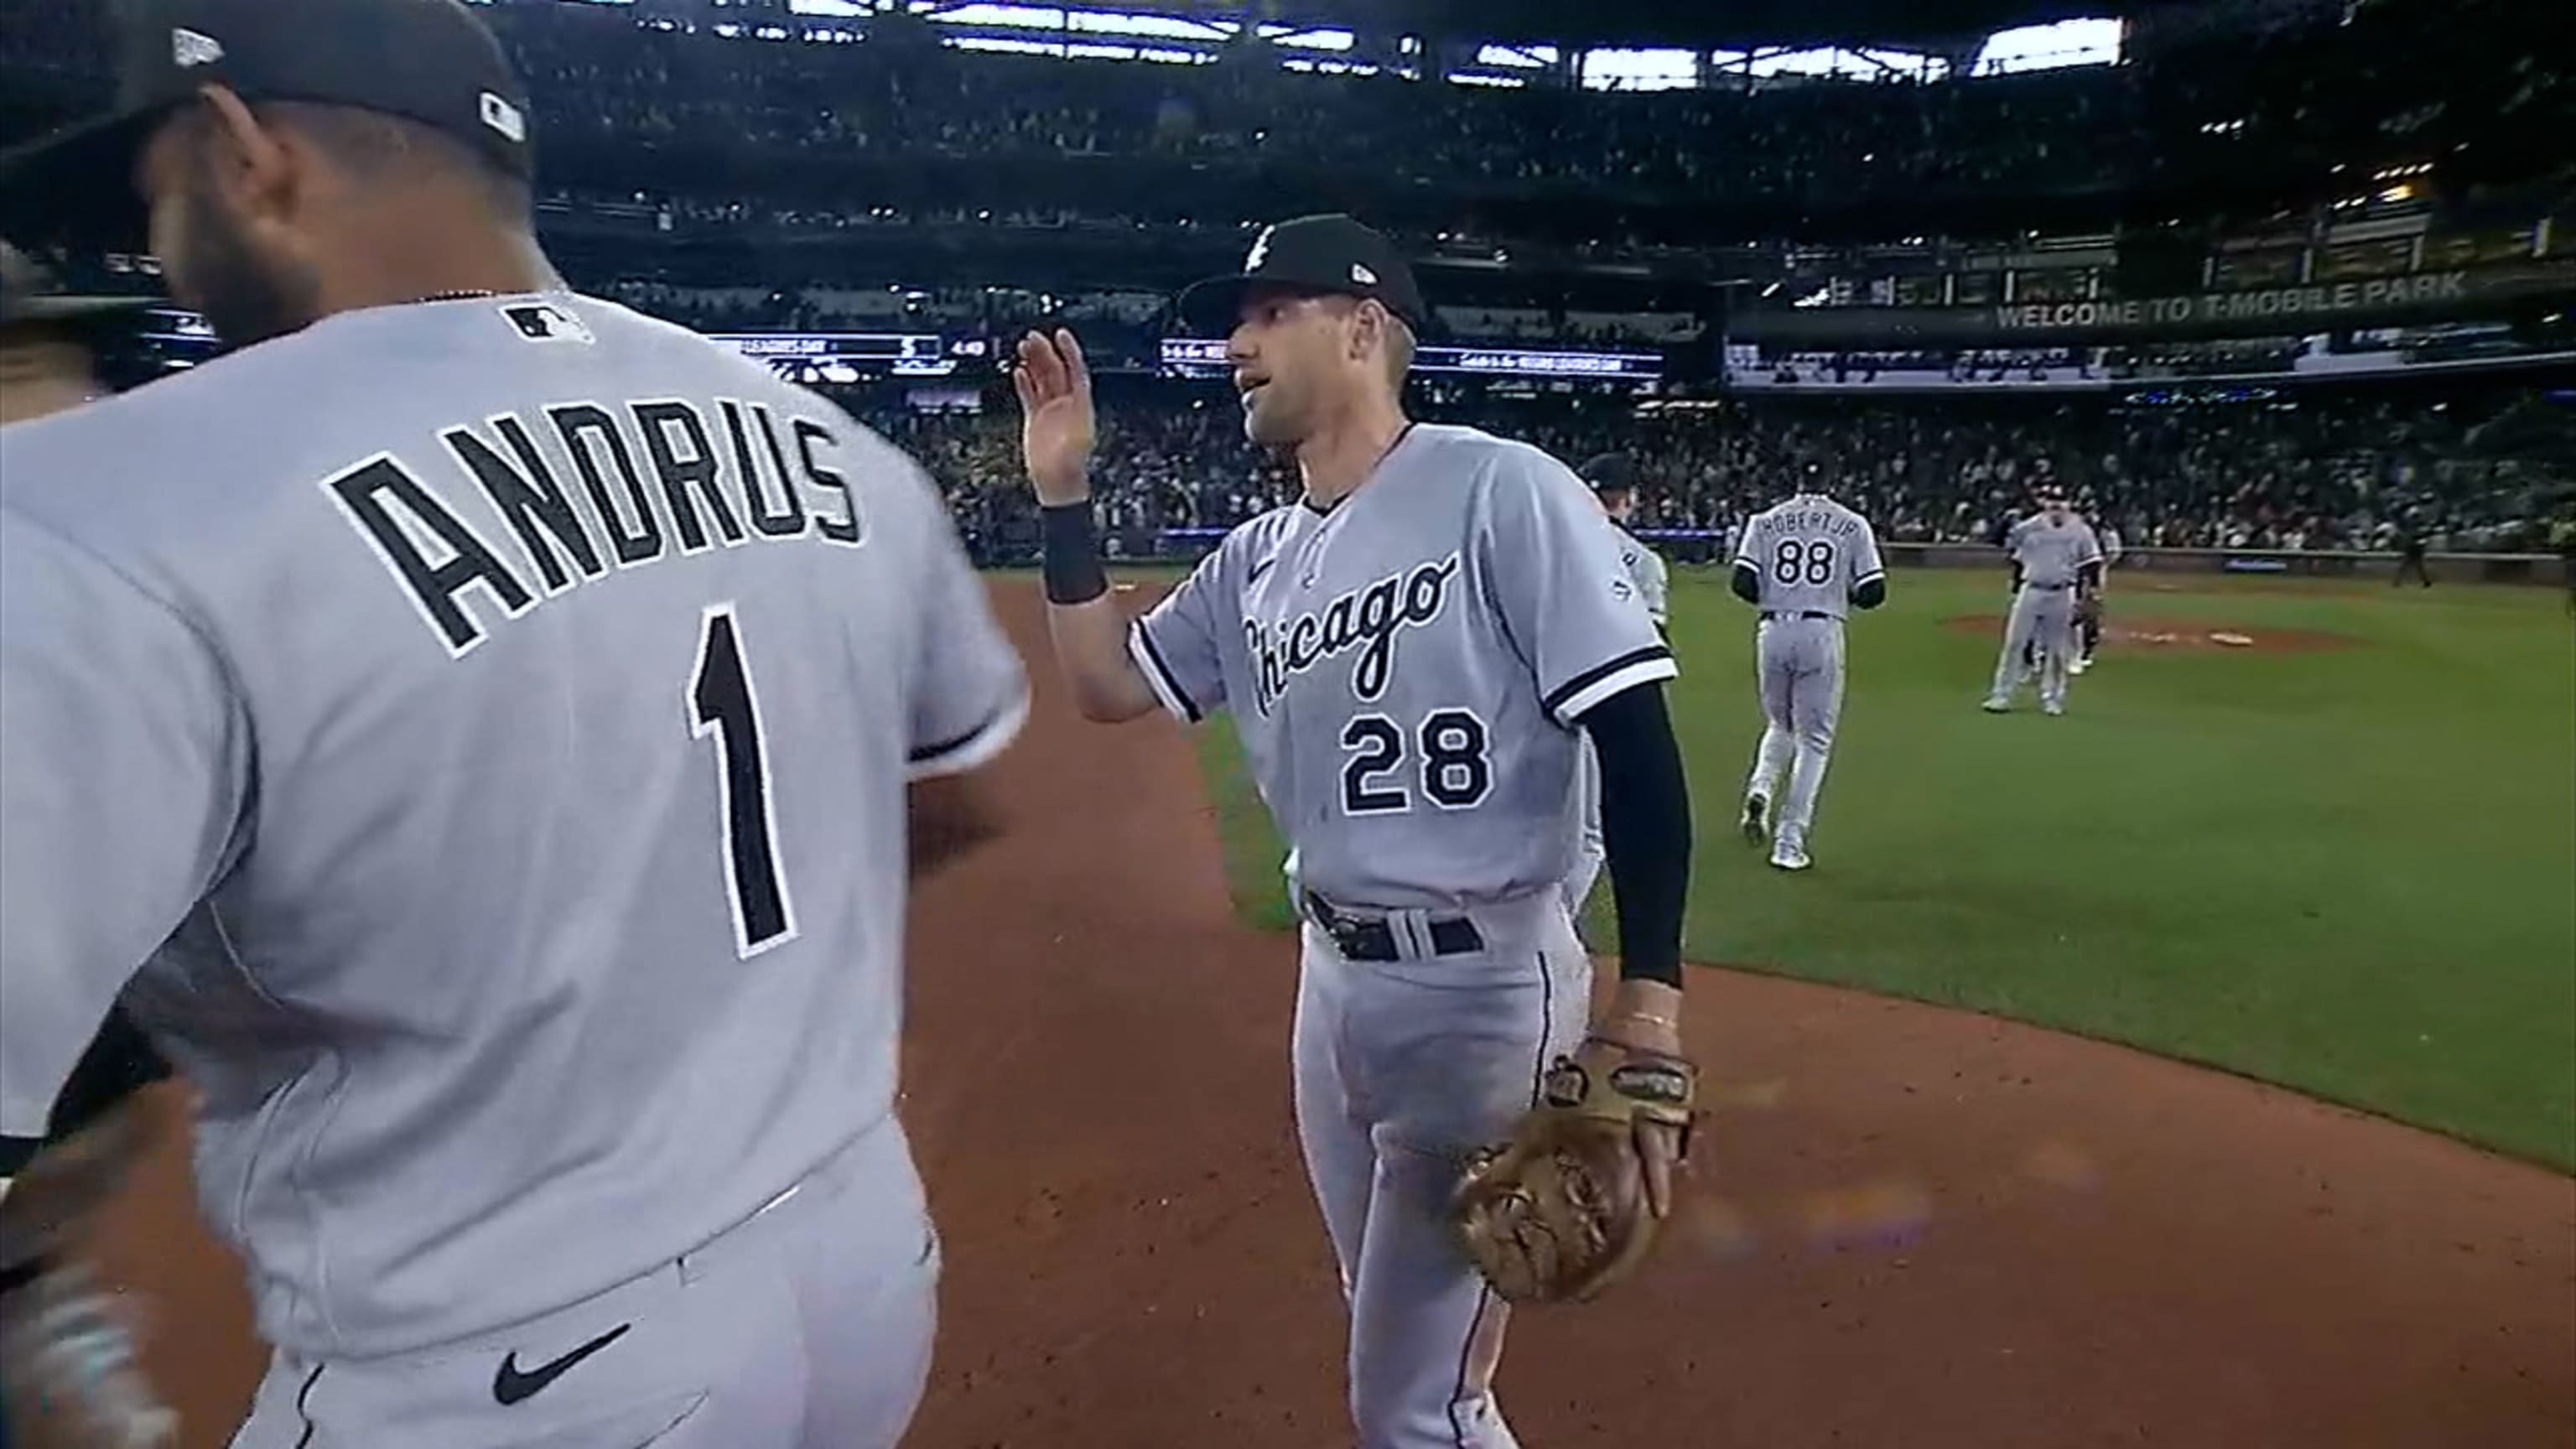 White Sox rookie Zach Remillard ties game in ninth, wins it in 11th vs.  Mariners in MLB debut 